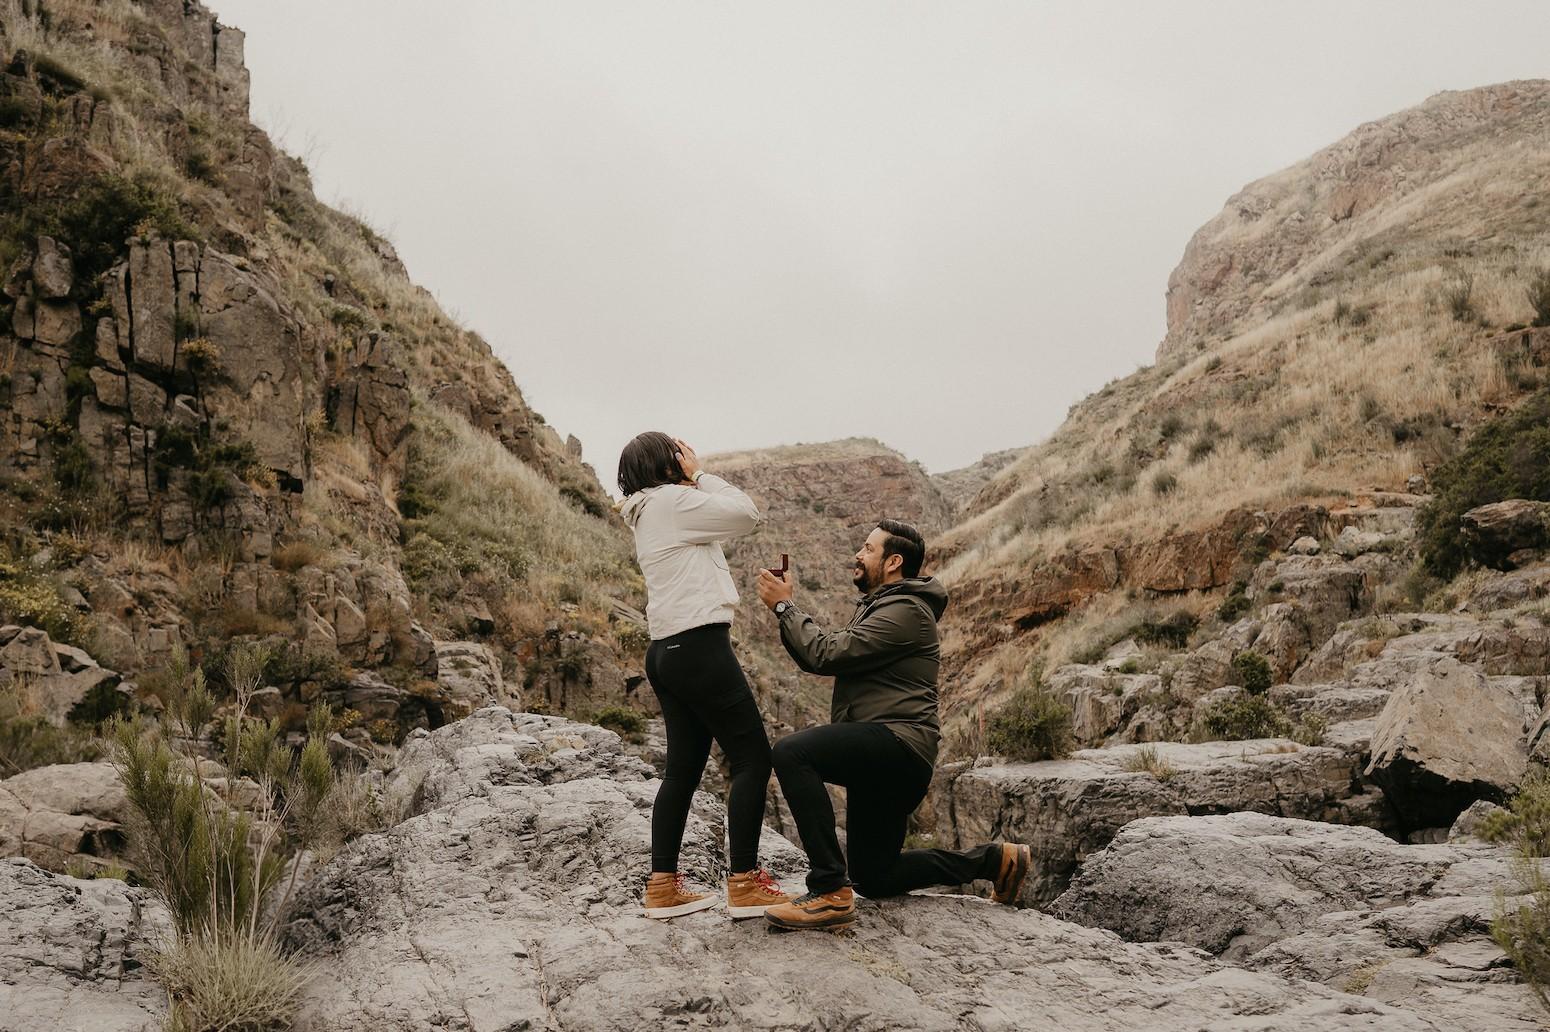 BEHIND THE SCENES OF A SURPRISE ENGAGEMENT PROPOSAL: A PHOTOGRAPHER'S TALE